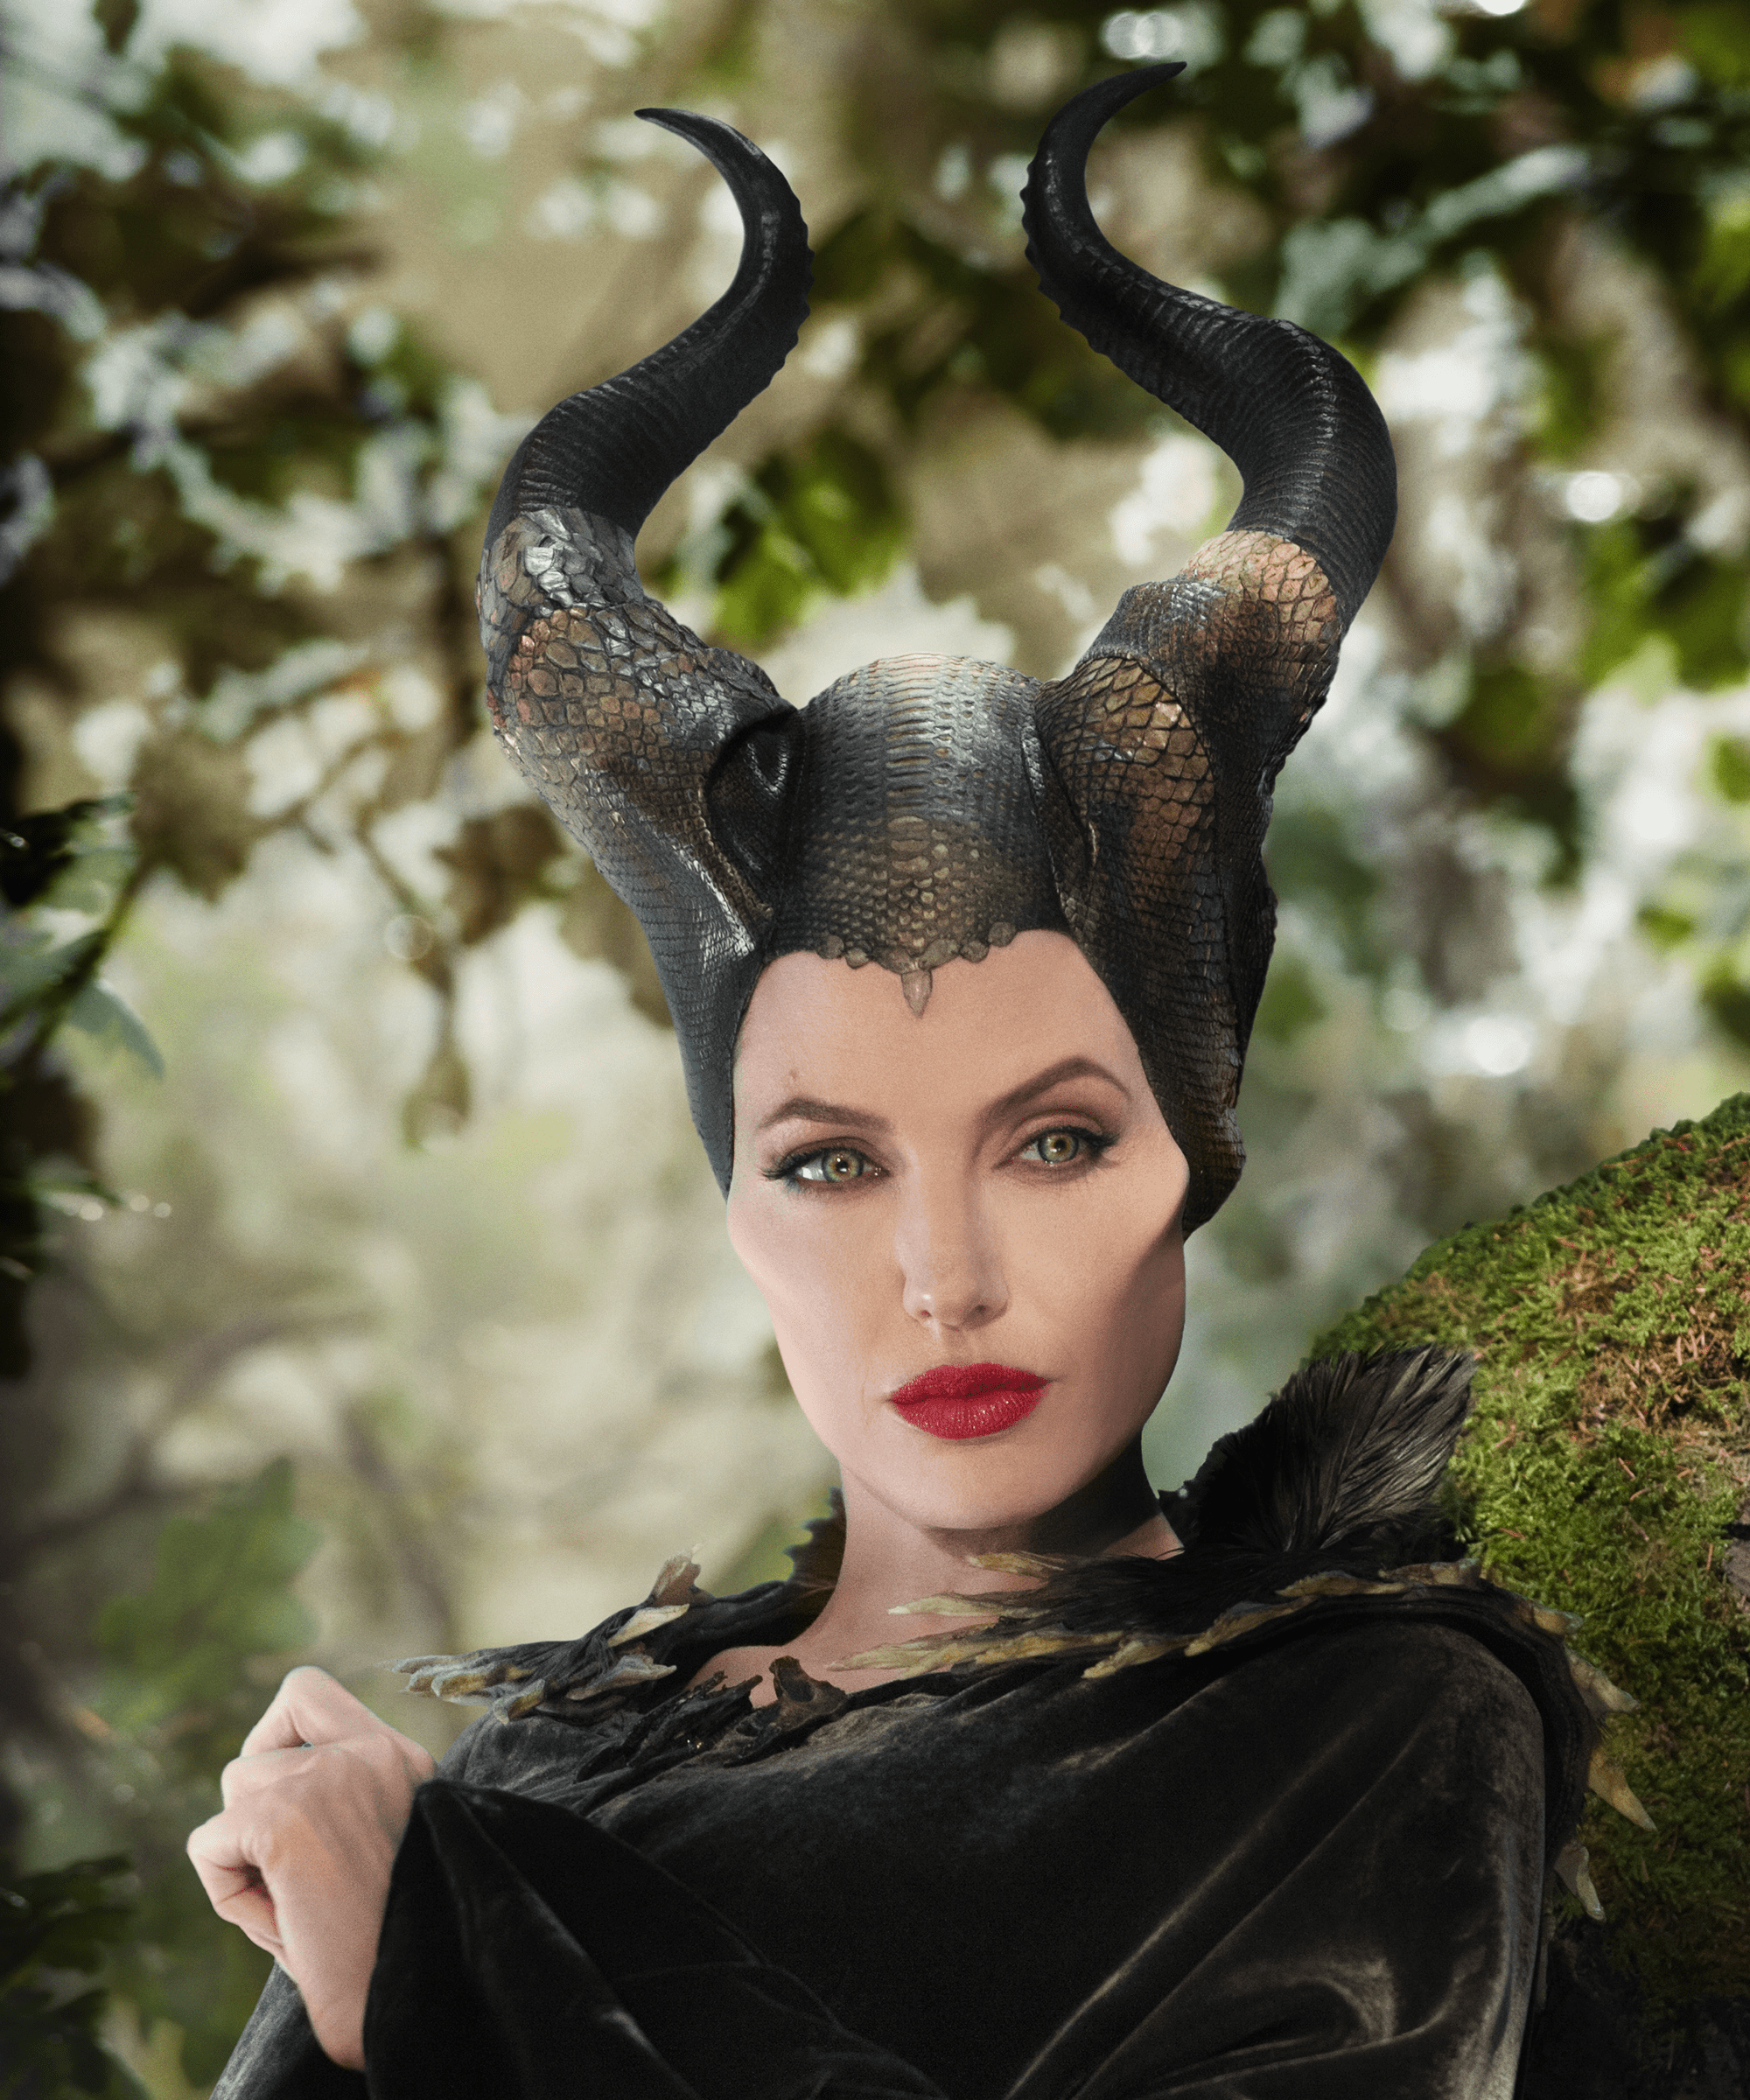 Angelina Jolie Perfected Her Maleficent Voice During Her Children’s Bath